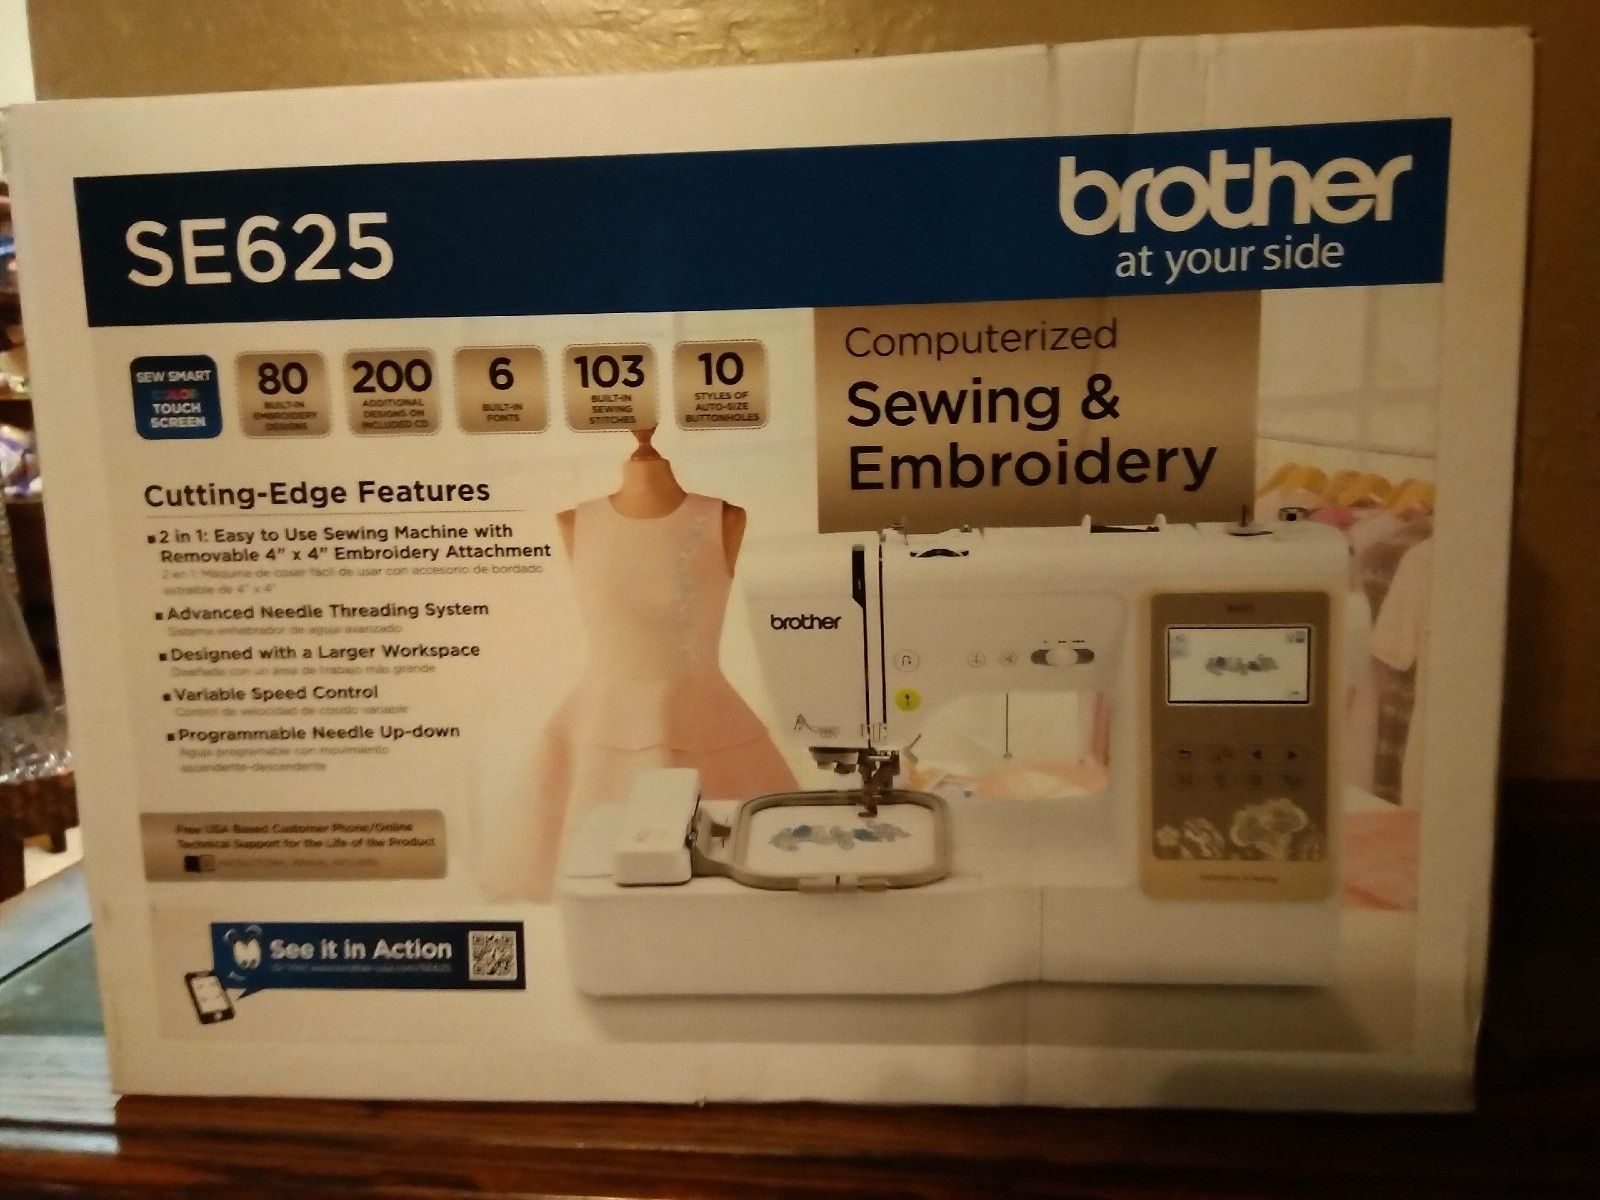 Brand new sewing machine, factory sealed SE625